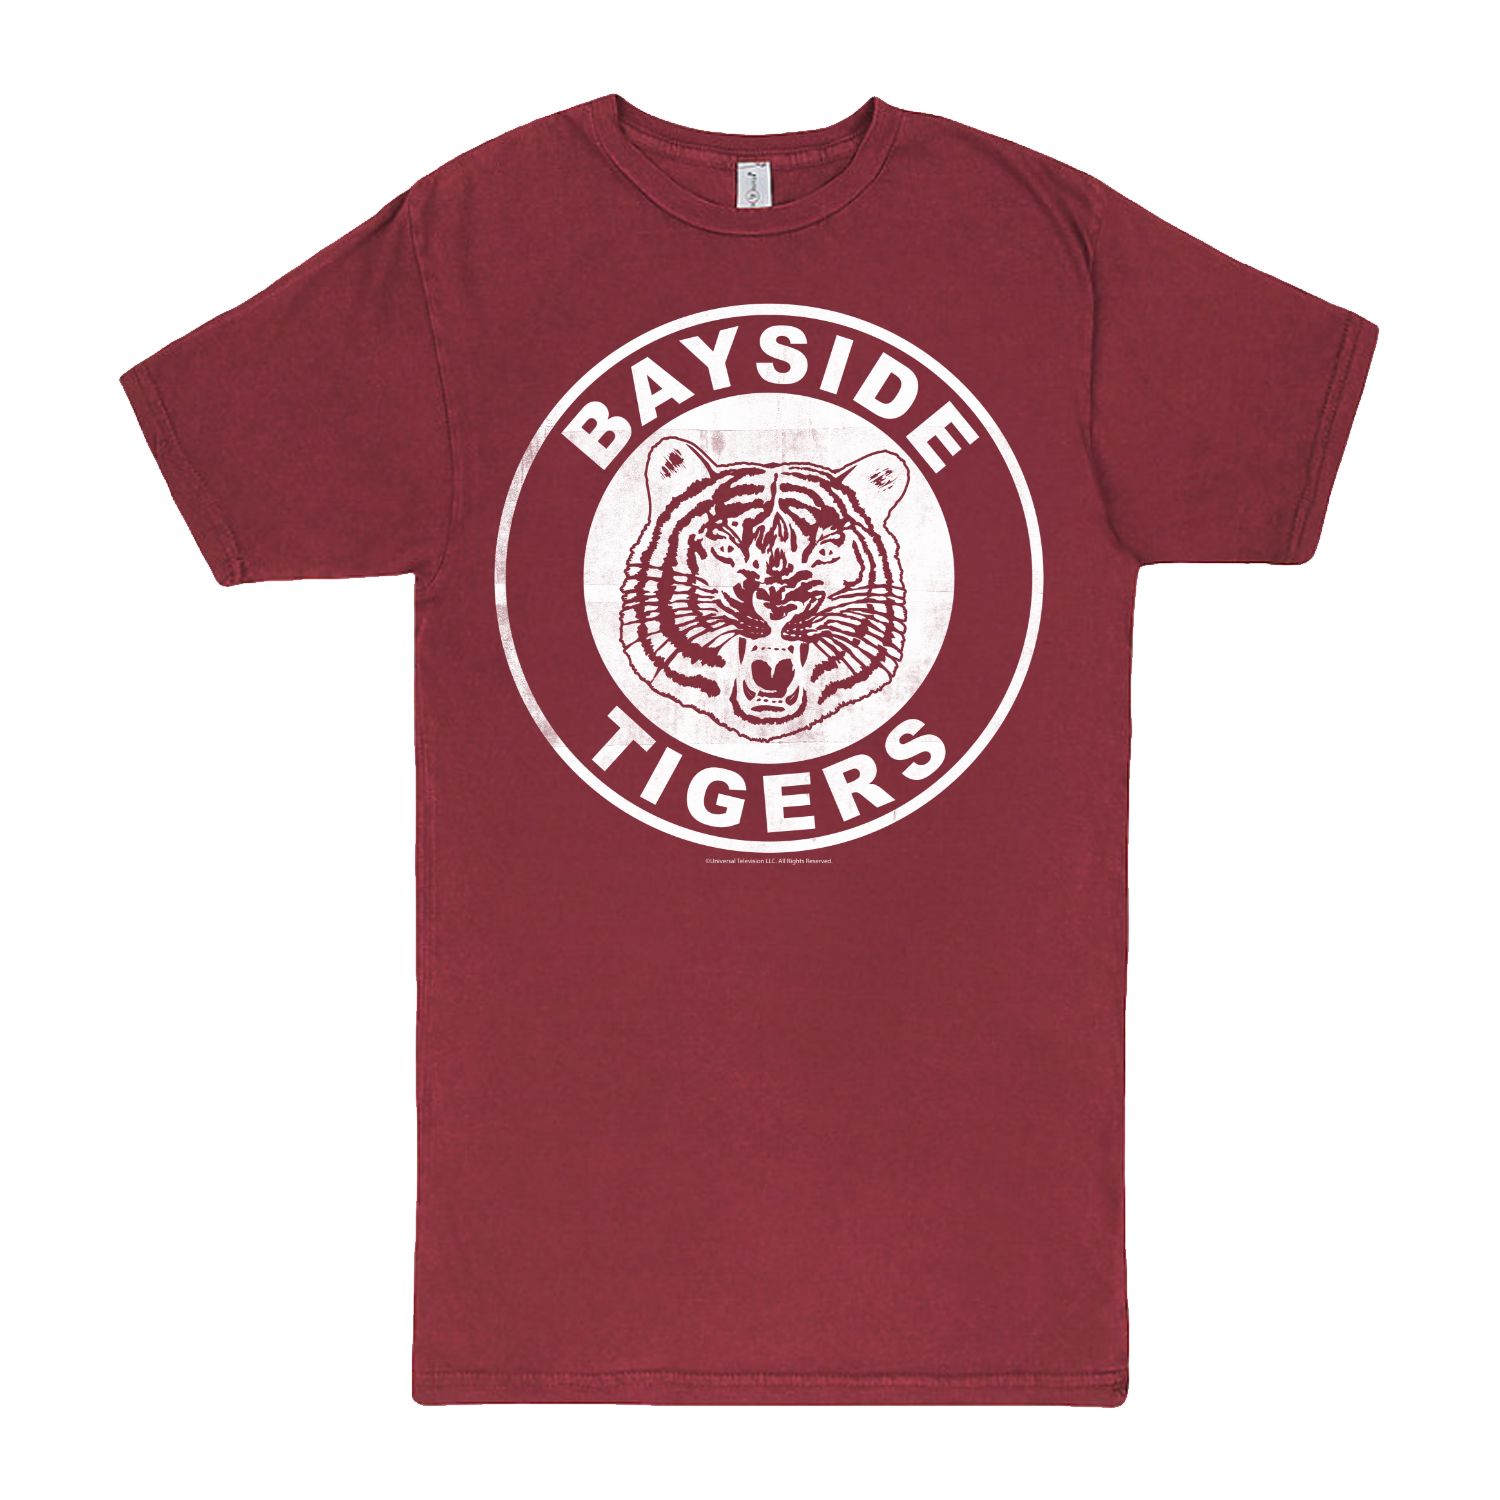 Saved by the Bell Bayside Tigers Distressed Short Sleeve T-Shirt